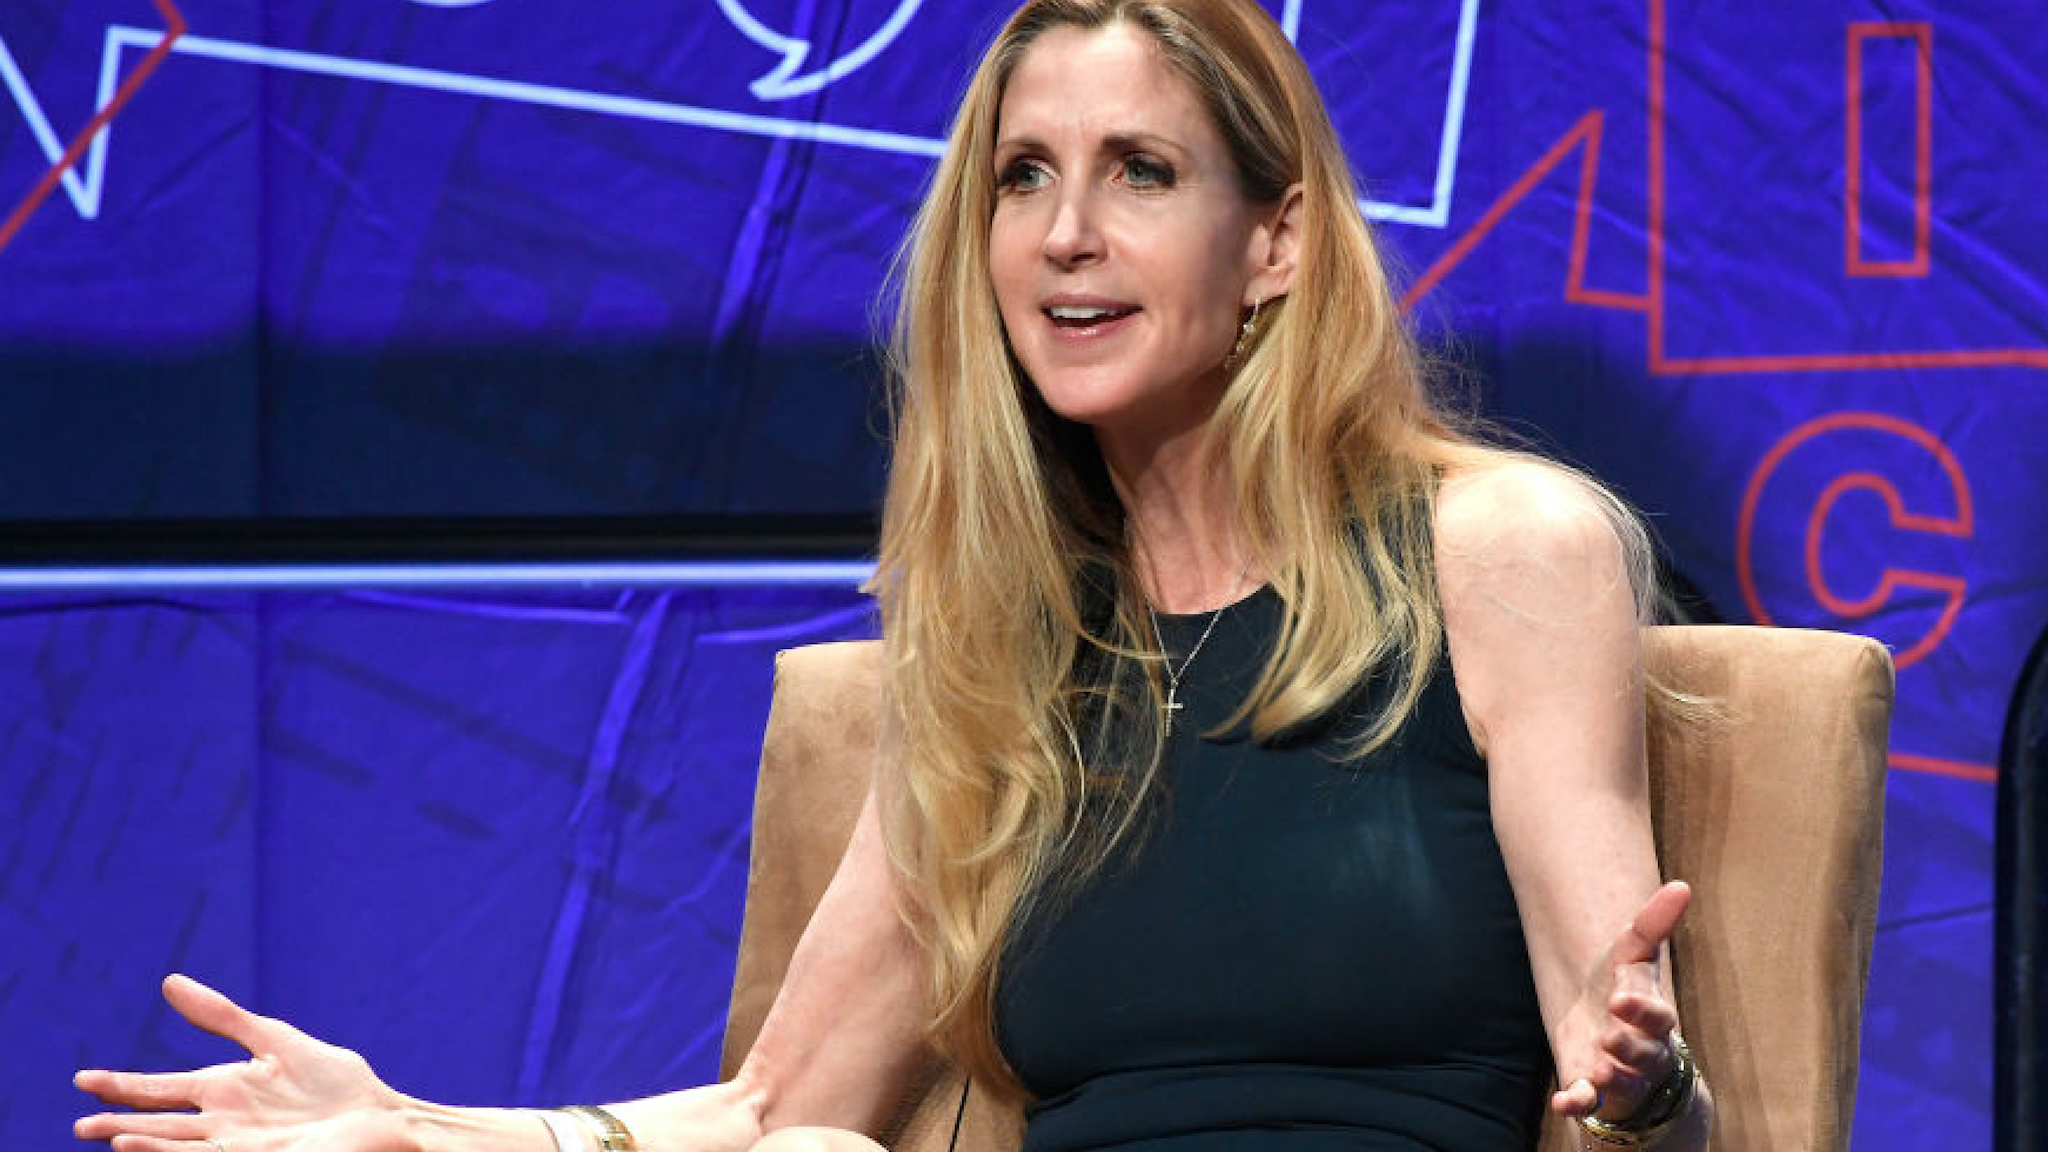 Ann Coulter speaks onstage at Politicon 2018 at Los Angeles Convention Center on October 20, 2018 in Los Angeles, California.